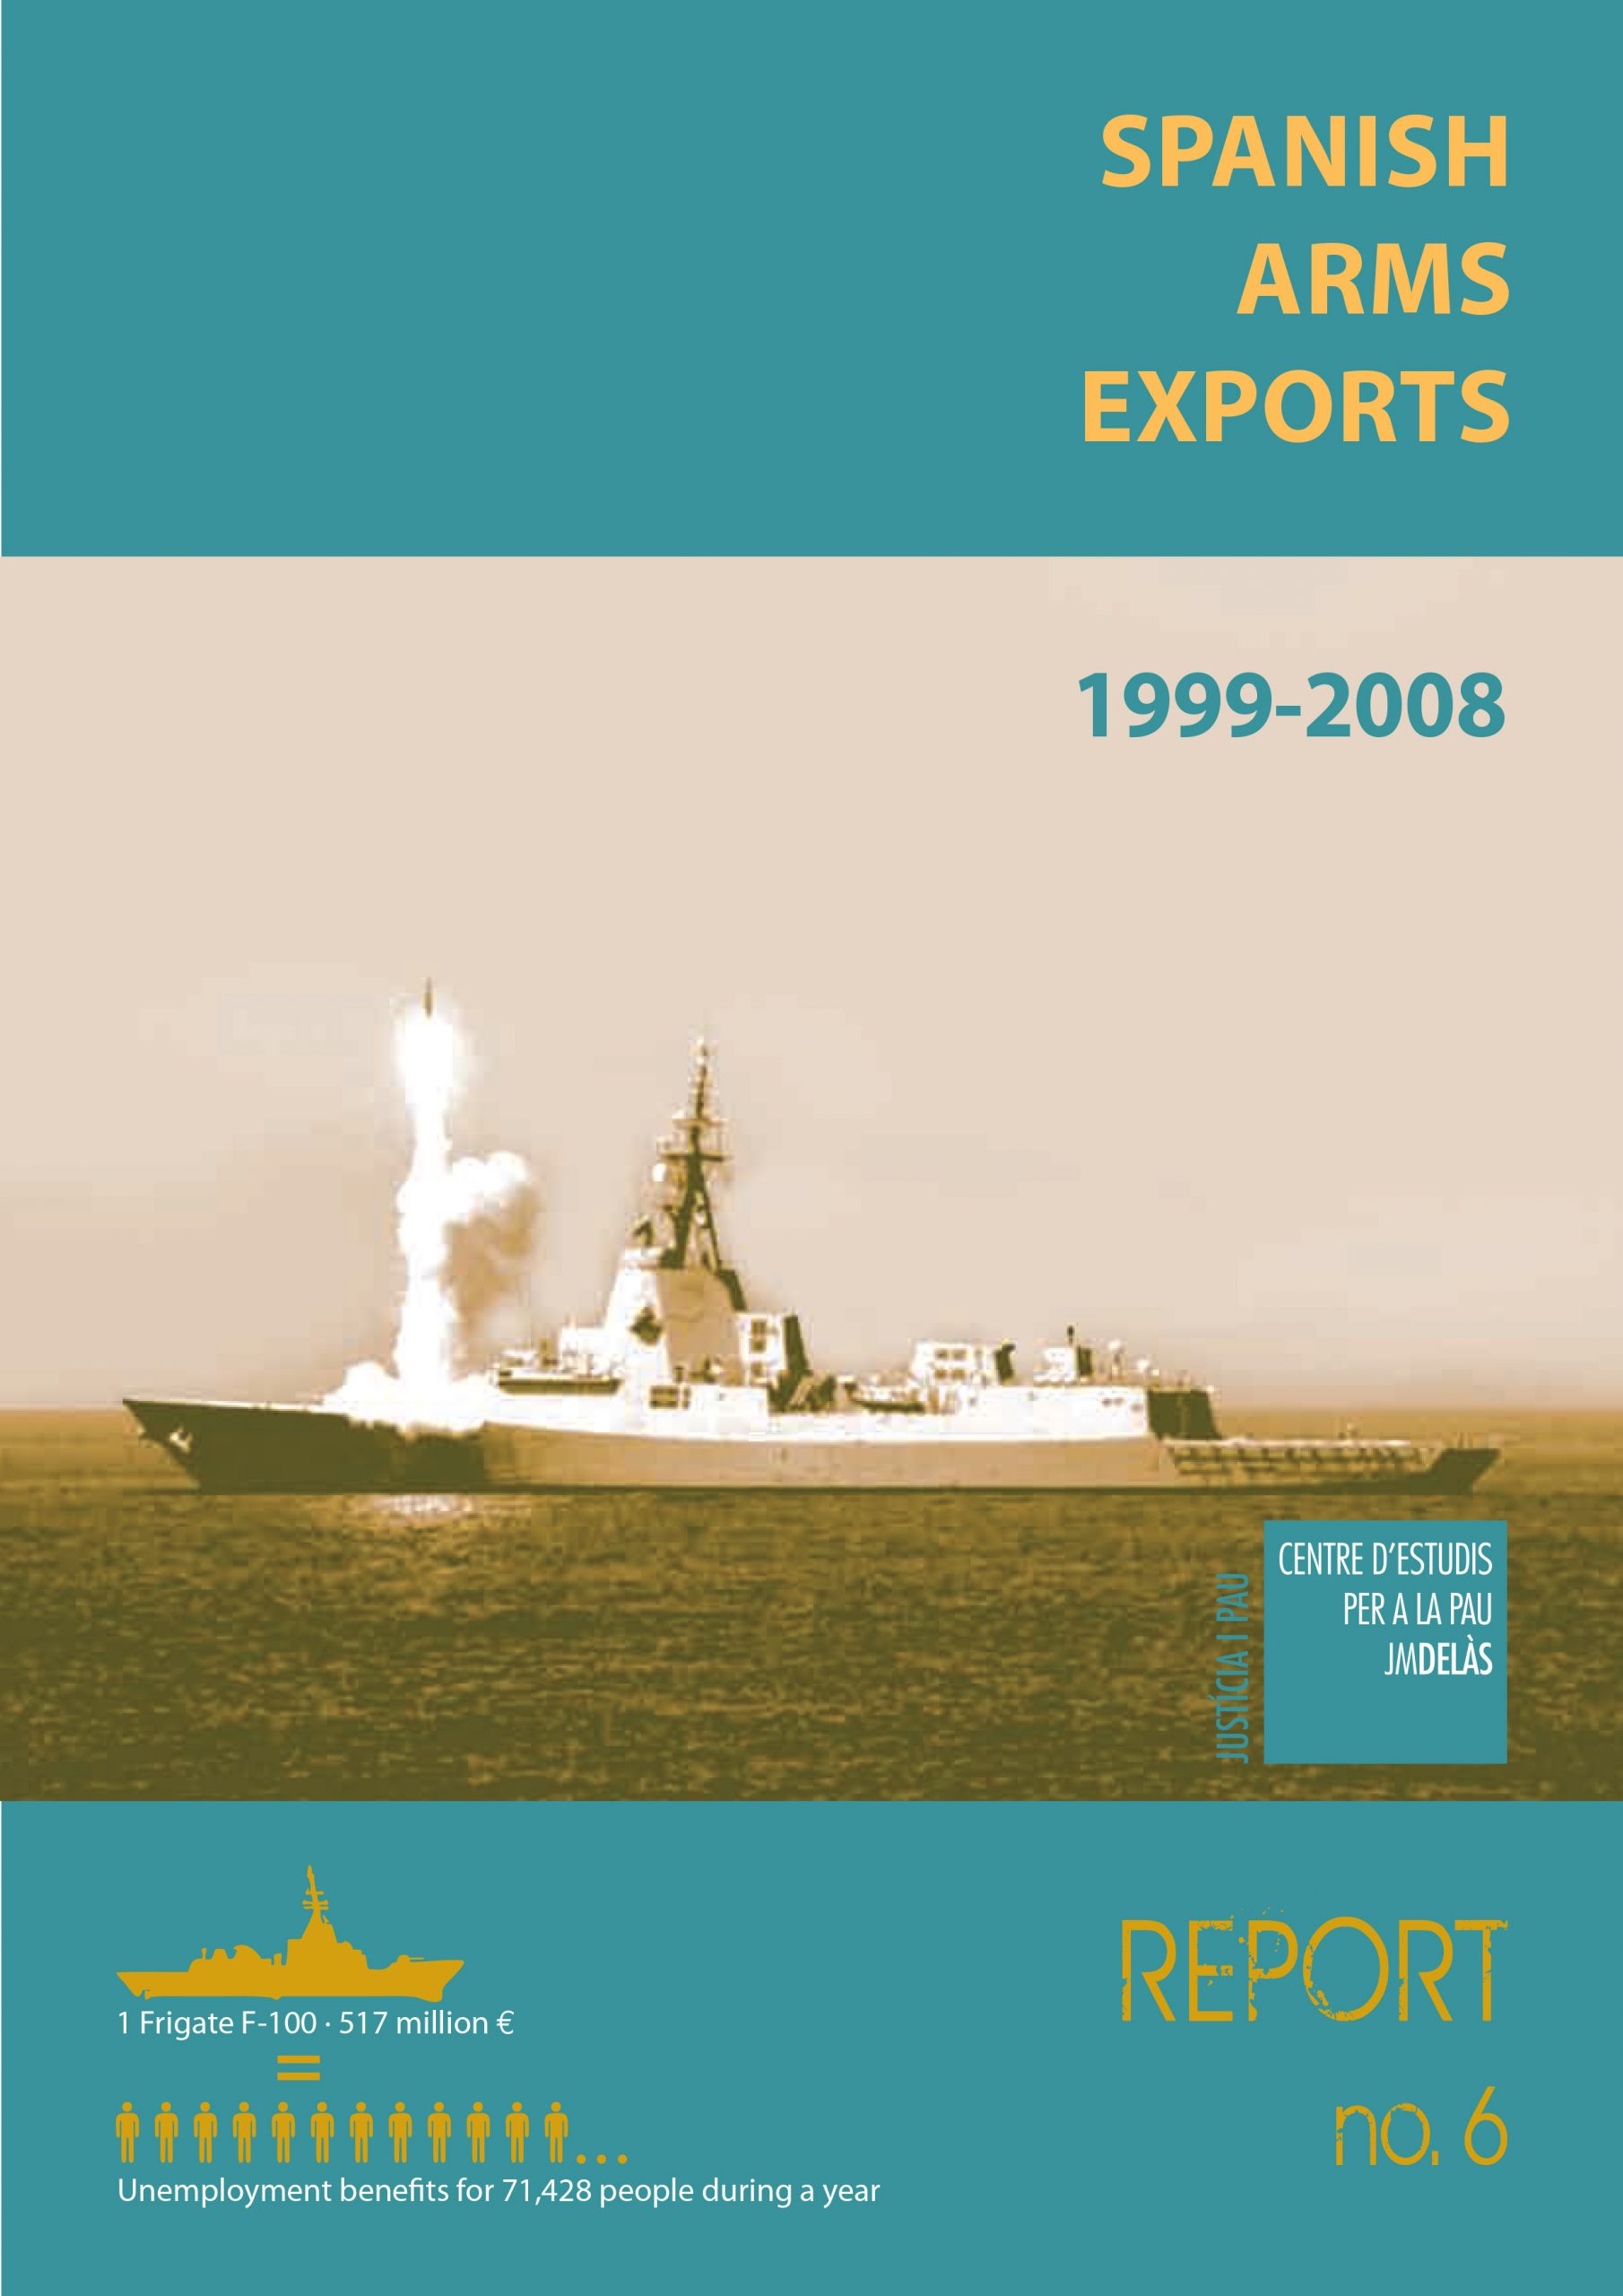 Report 6: Spanish arms exports 1999-2008